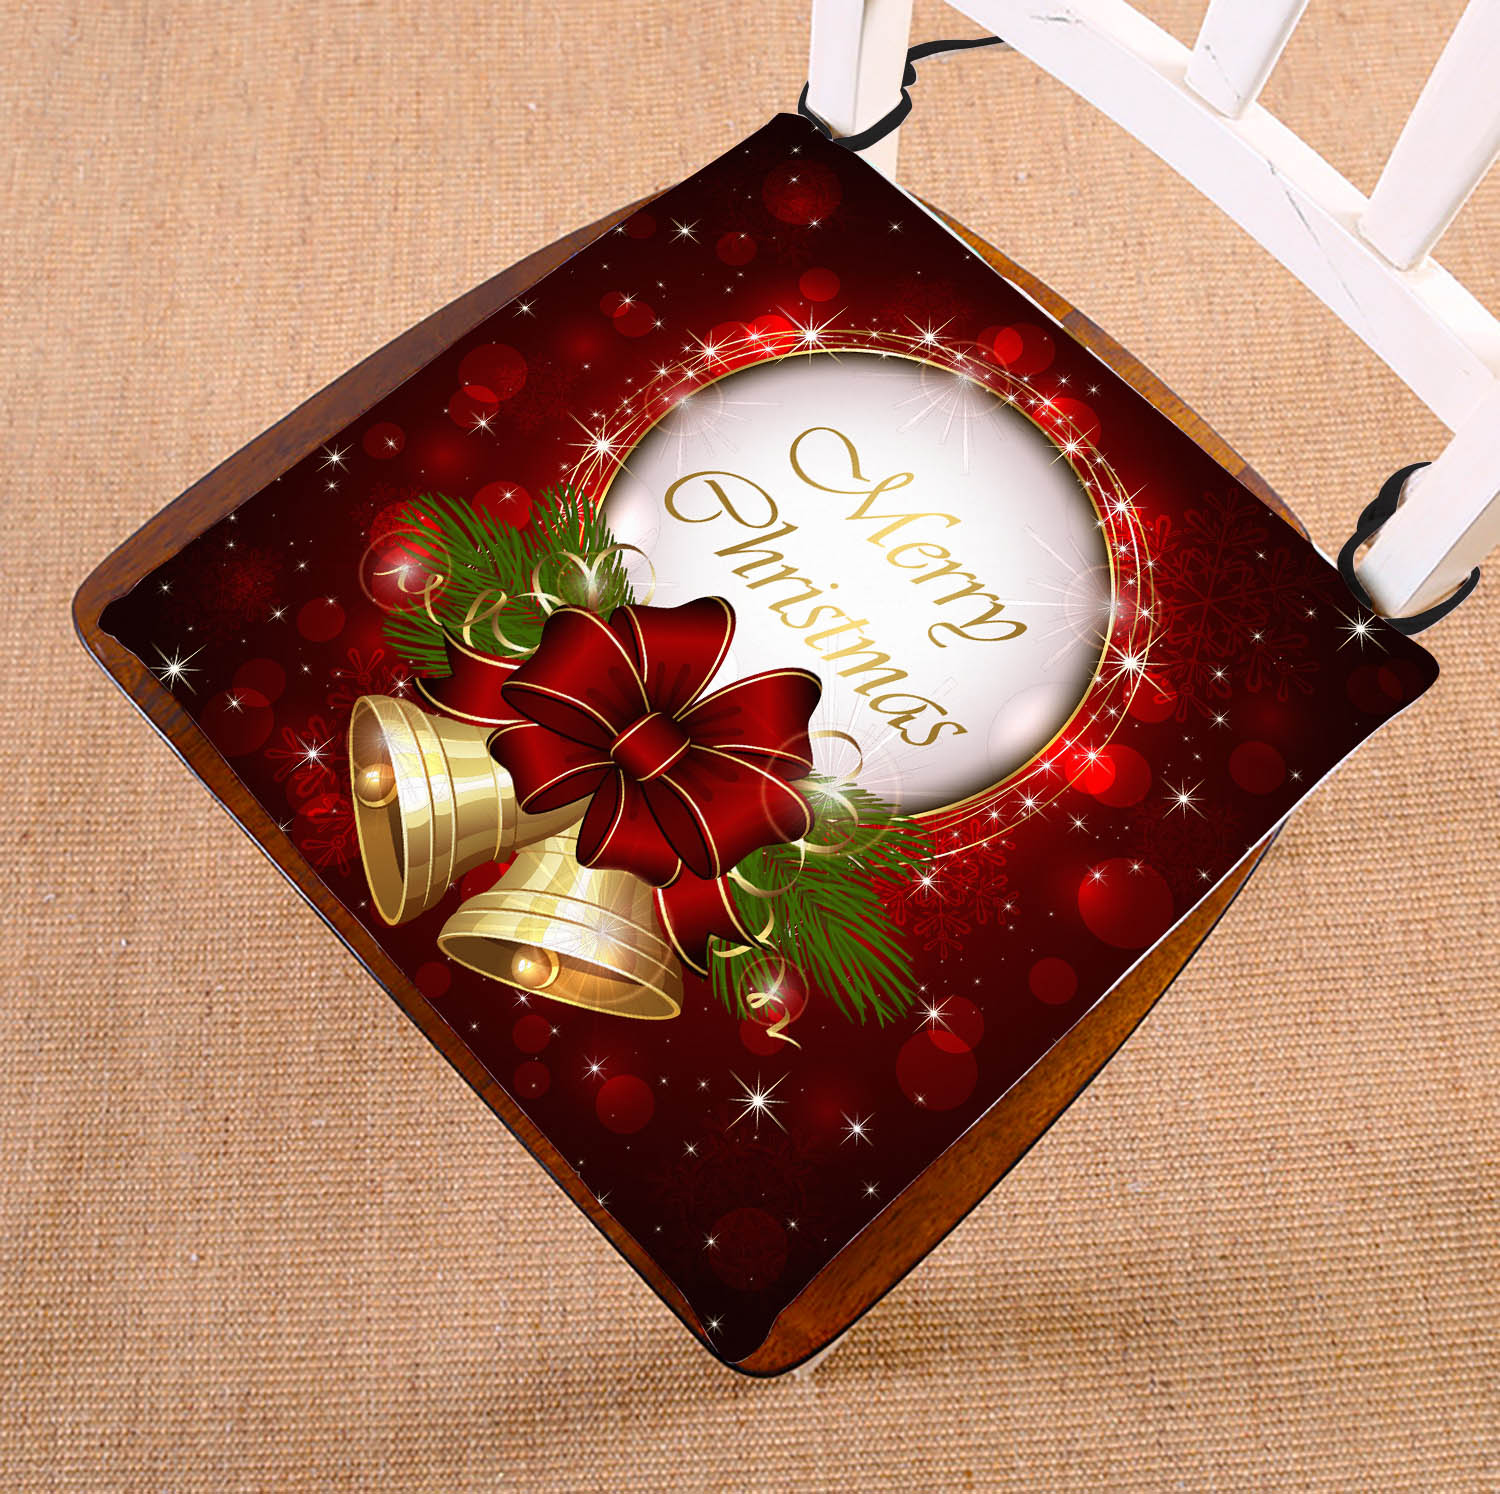 GCKG Merry Christmas Chair Cushion,Merry Christmas Chair Pad Seat Cushion Chair Cushion Floor Cushion with Breathable Memory Inner Cushion and Ties Two Sides Printing 16x16 inch - image 1 of 3